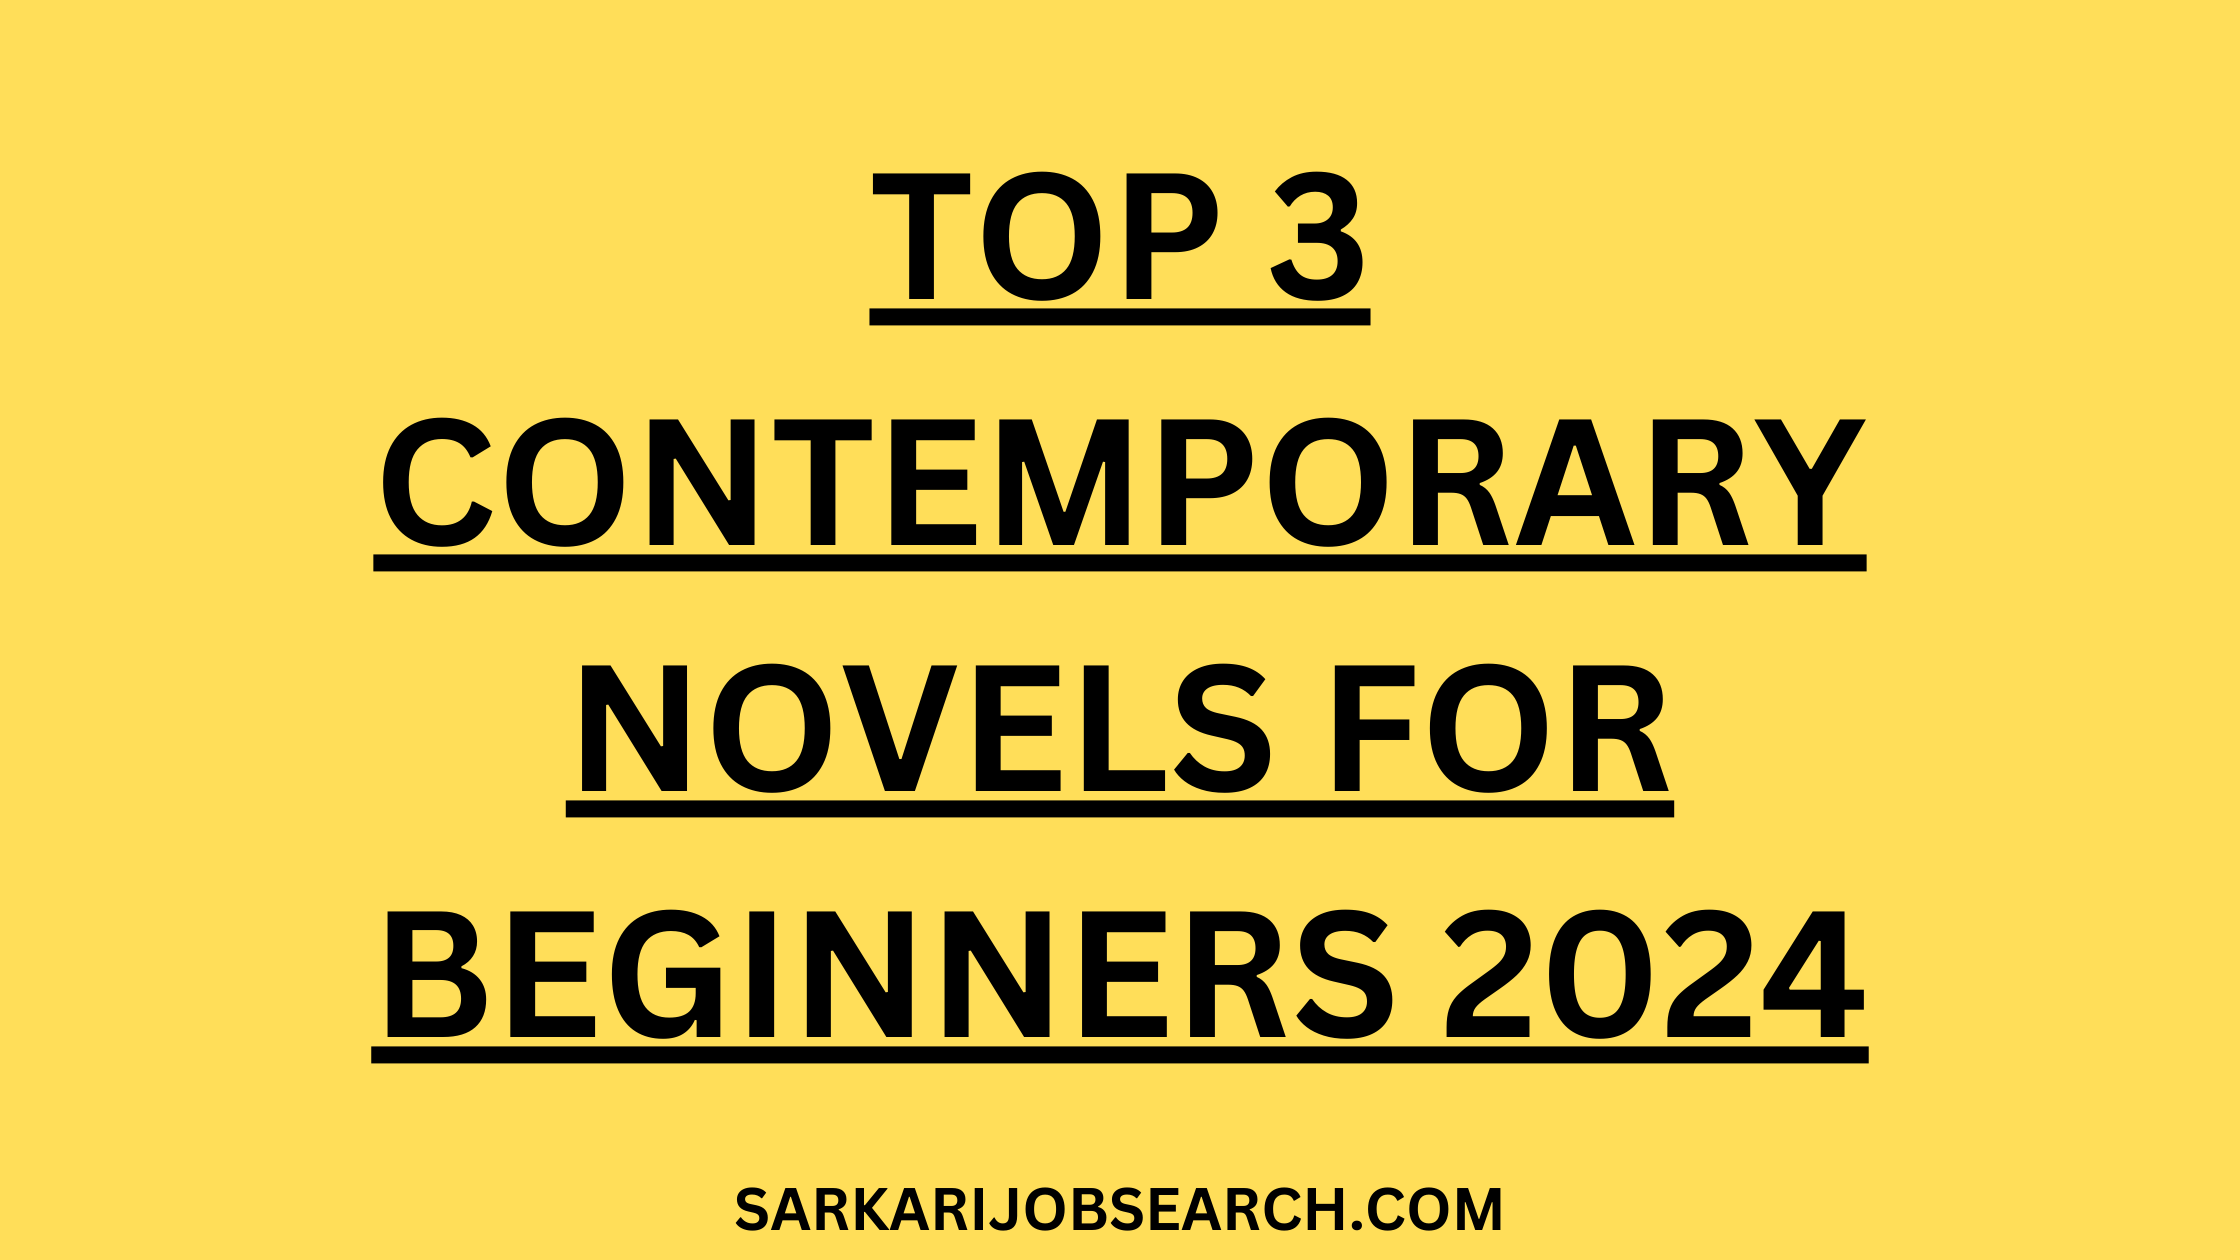 Top 3 Contemporary Novels for Beginners 2024